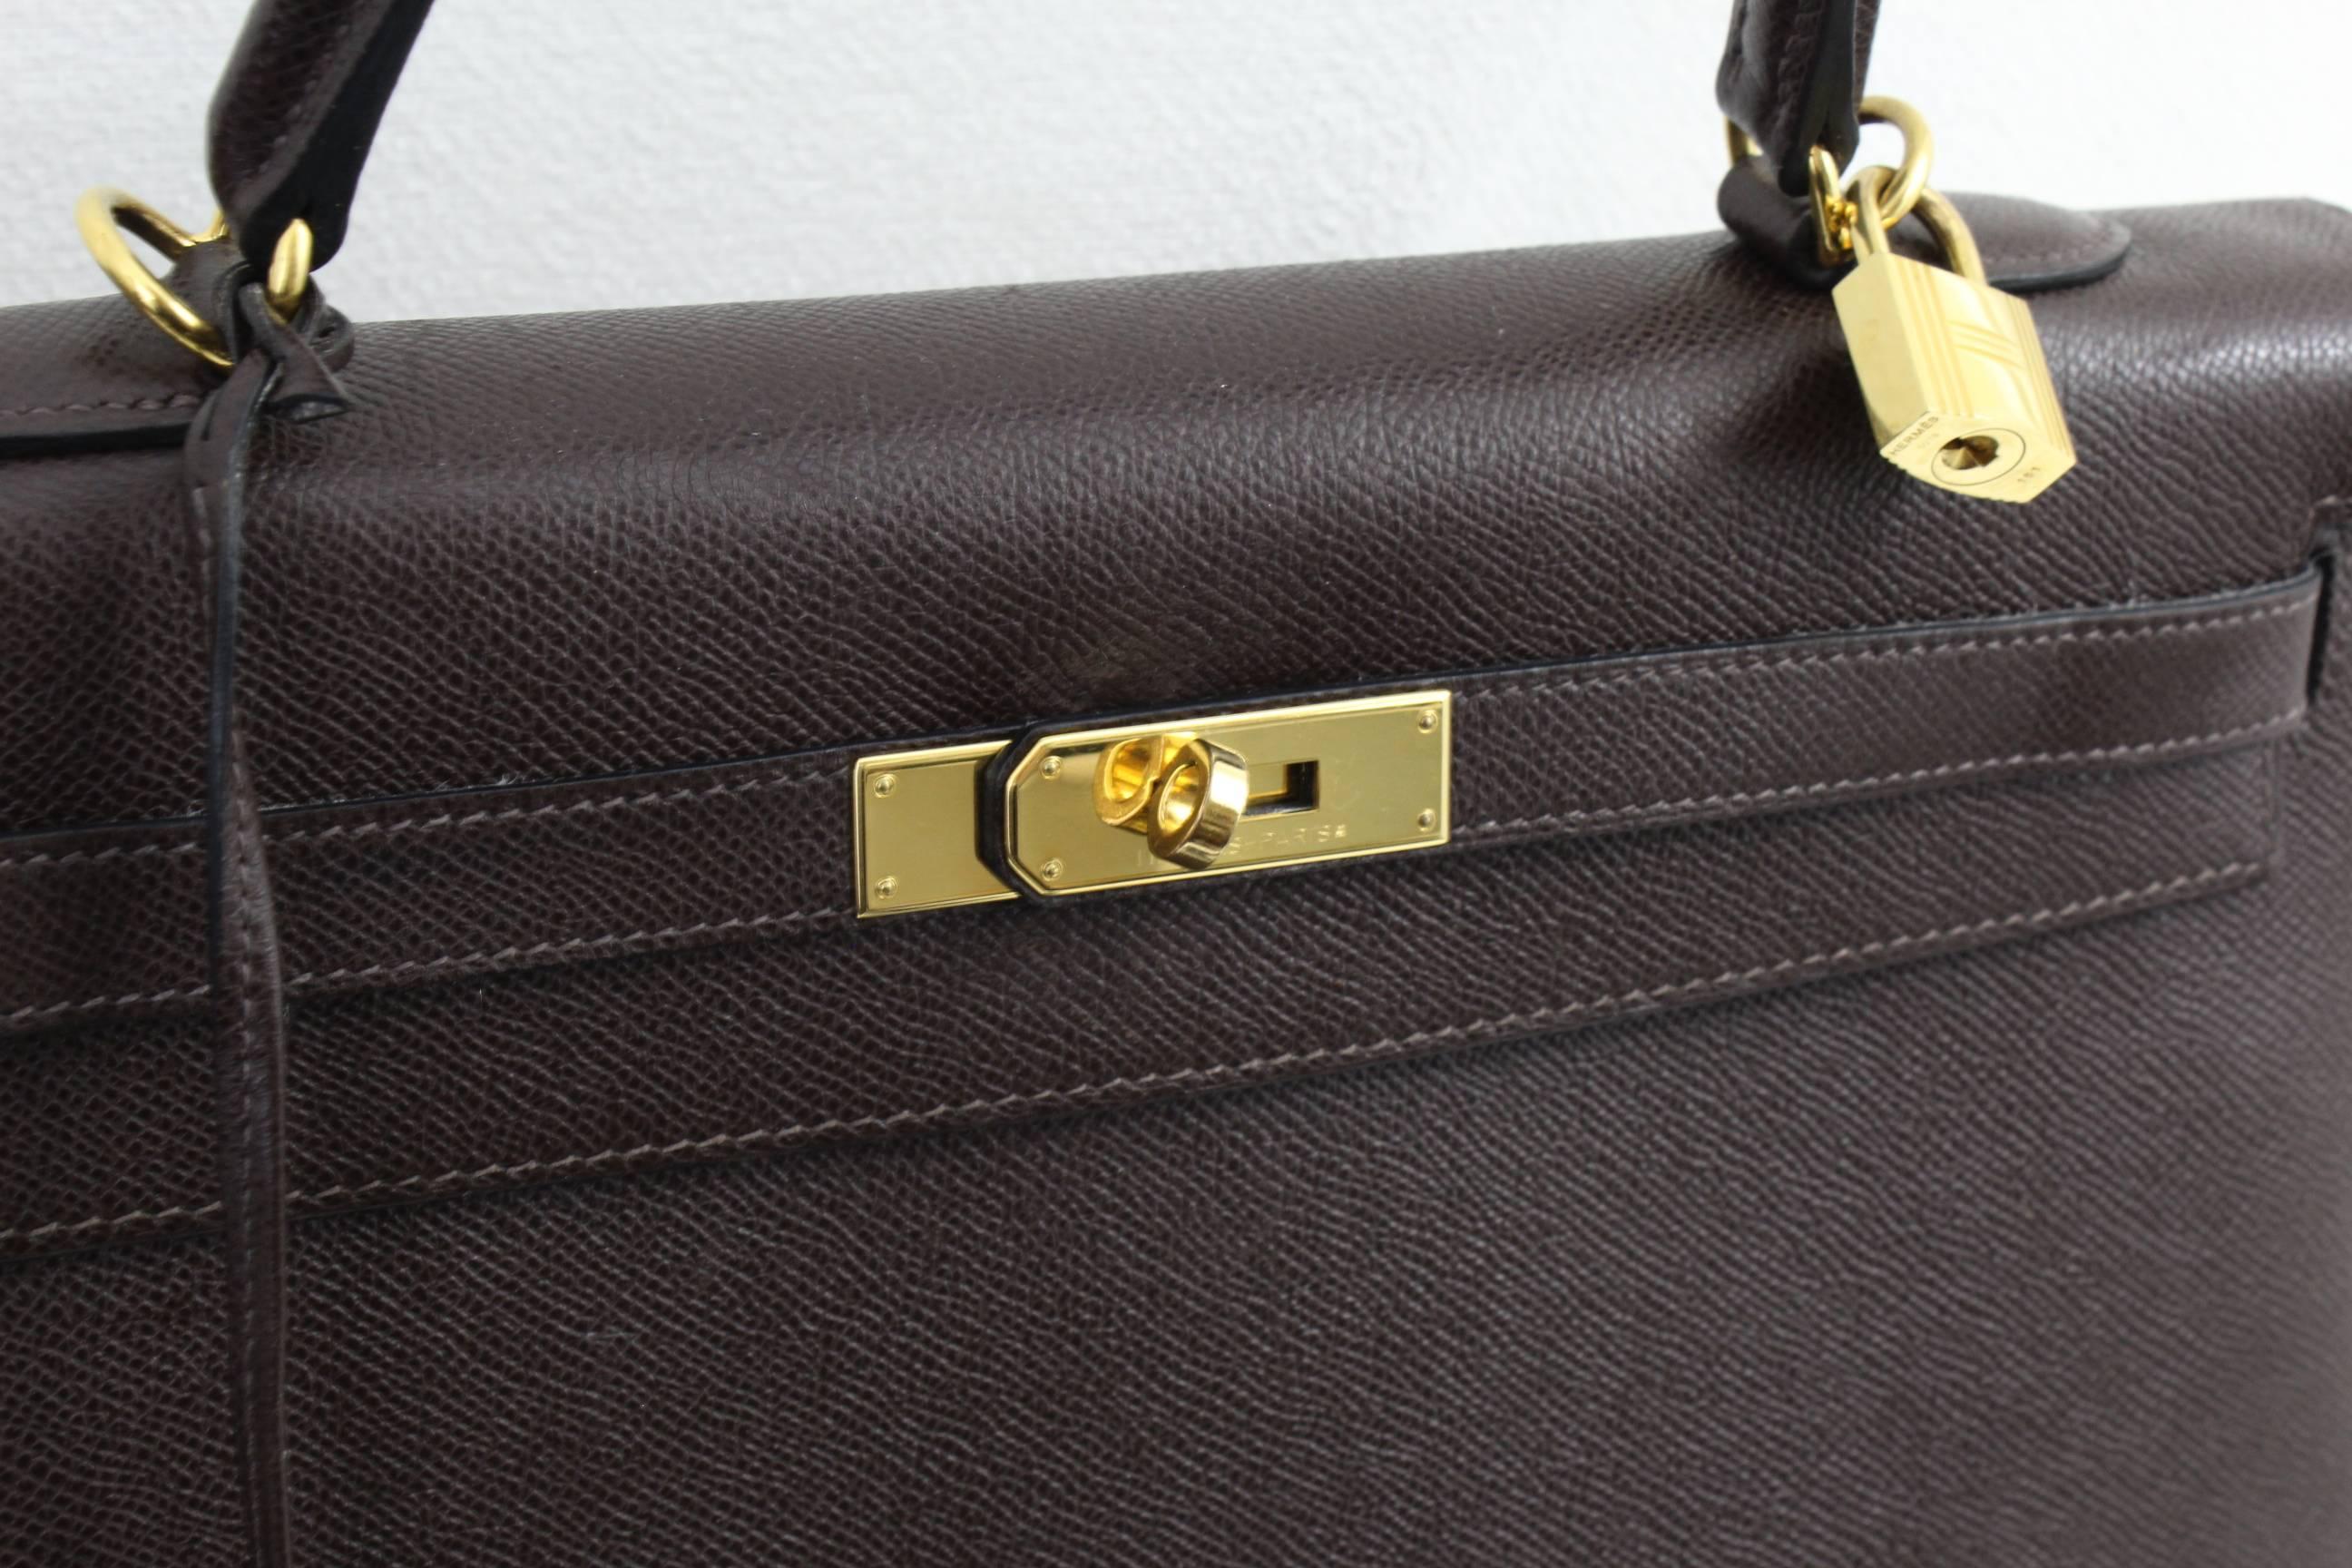 Really nice Hermes Kelly 36 Bag in Dak Brown Epson Leather.

Comes with shoulder strap, key, clochette.

Good condition but the bag has been used and it has some light marks on corners and leather. Hard to make a photo as the bag is really dark but